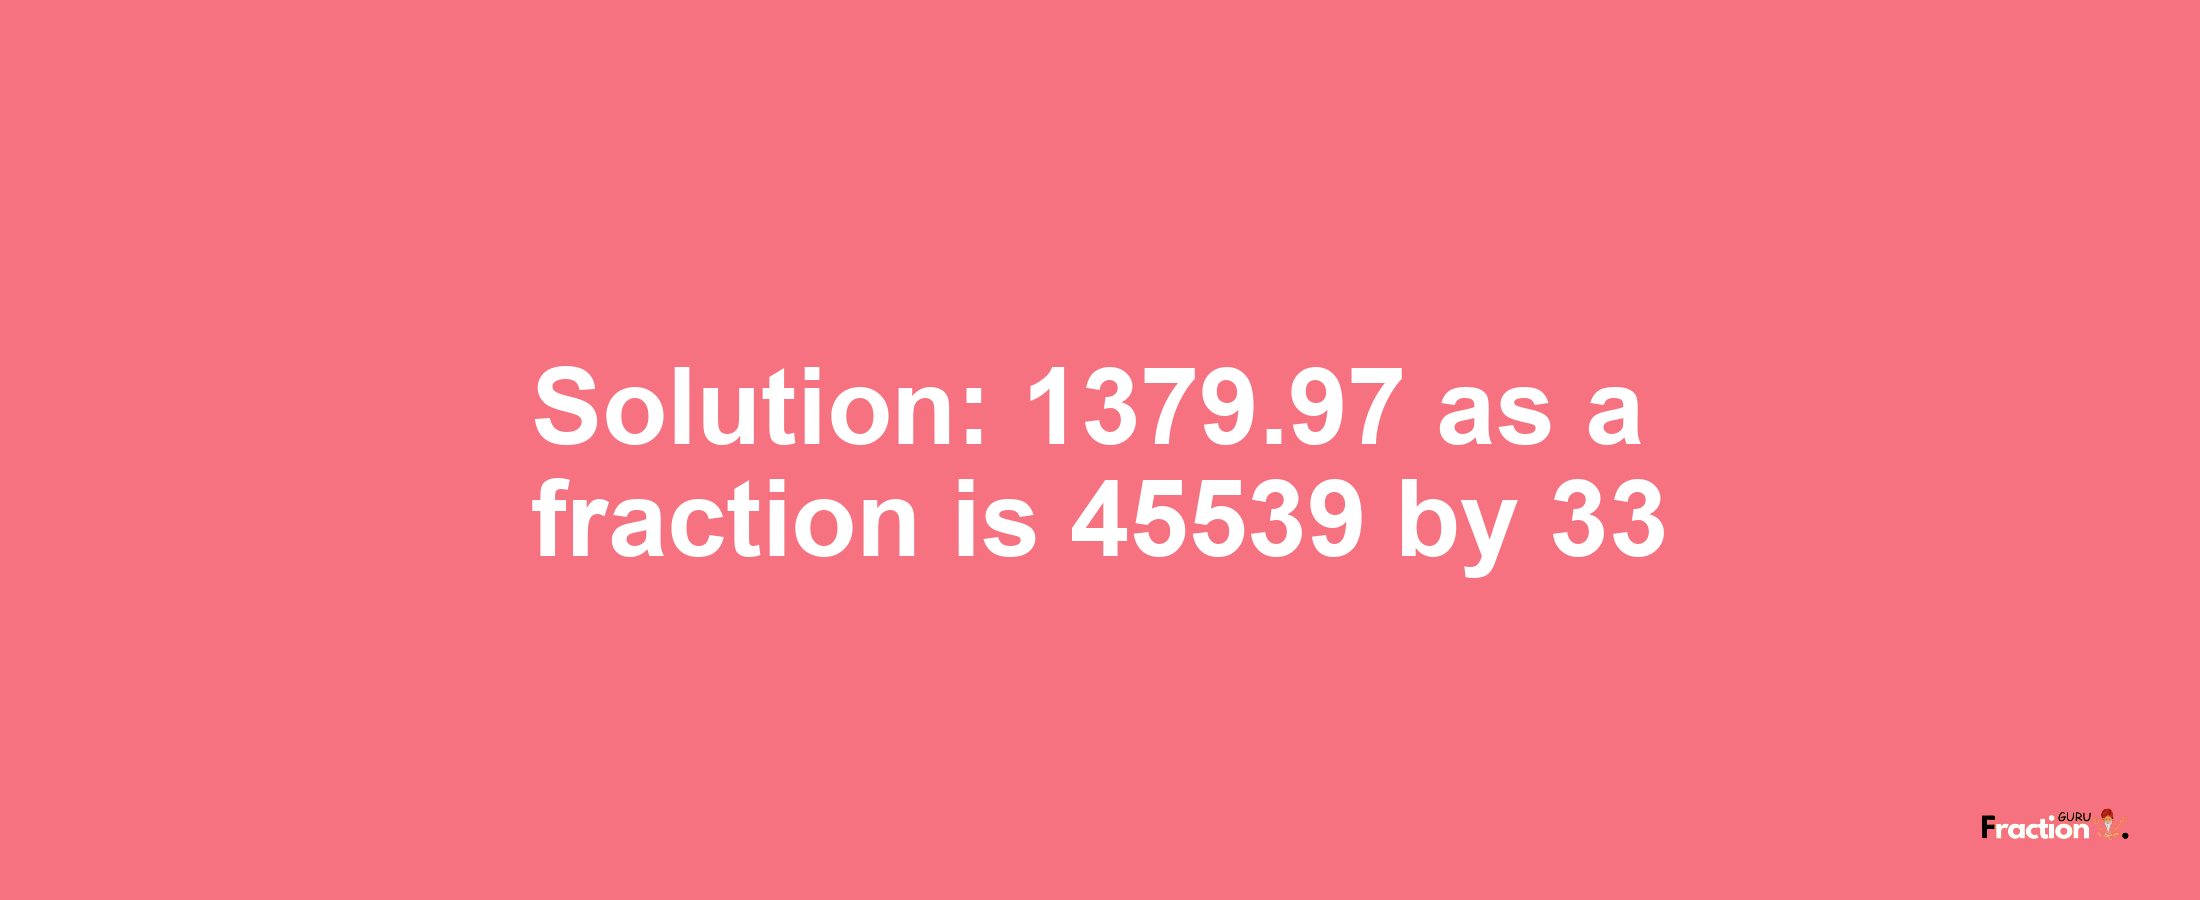 Solution:1379.97 as a fraction is 45539/33